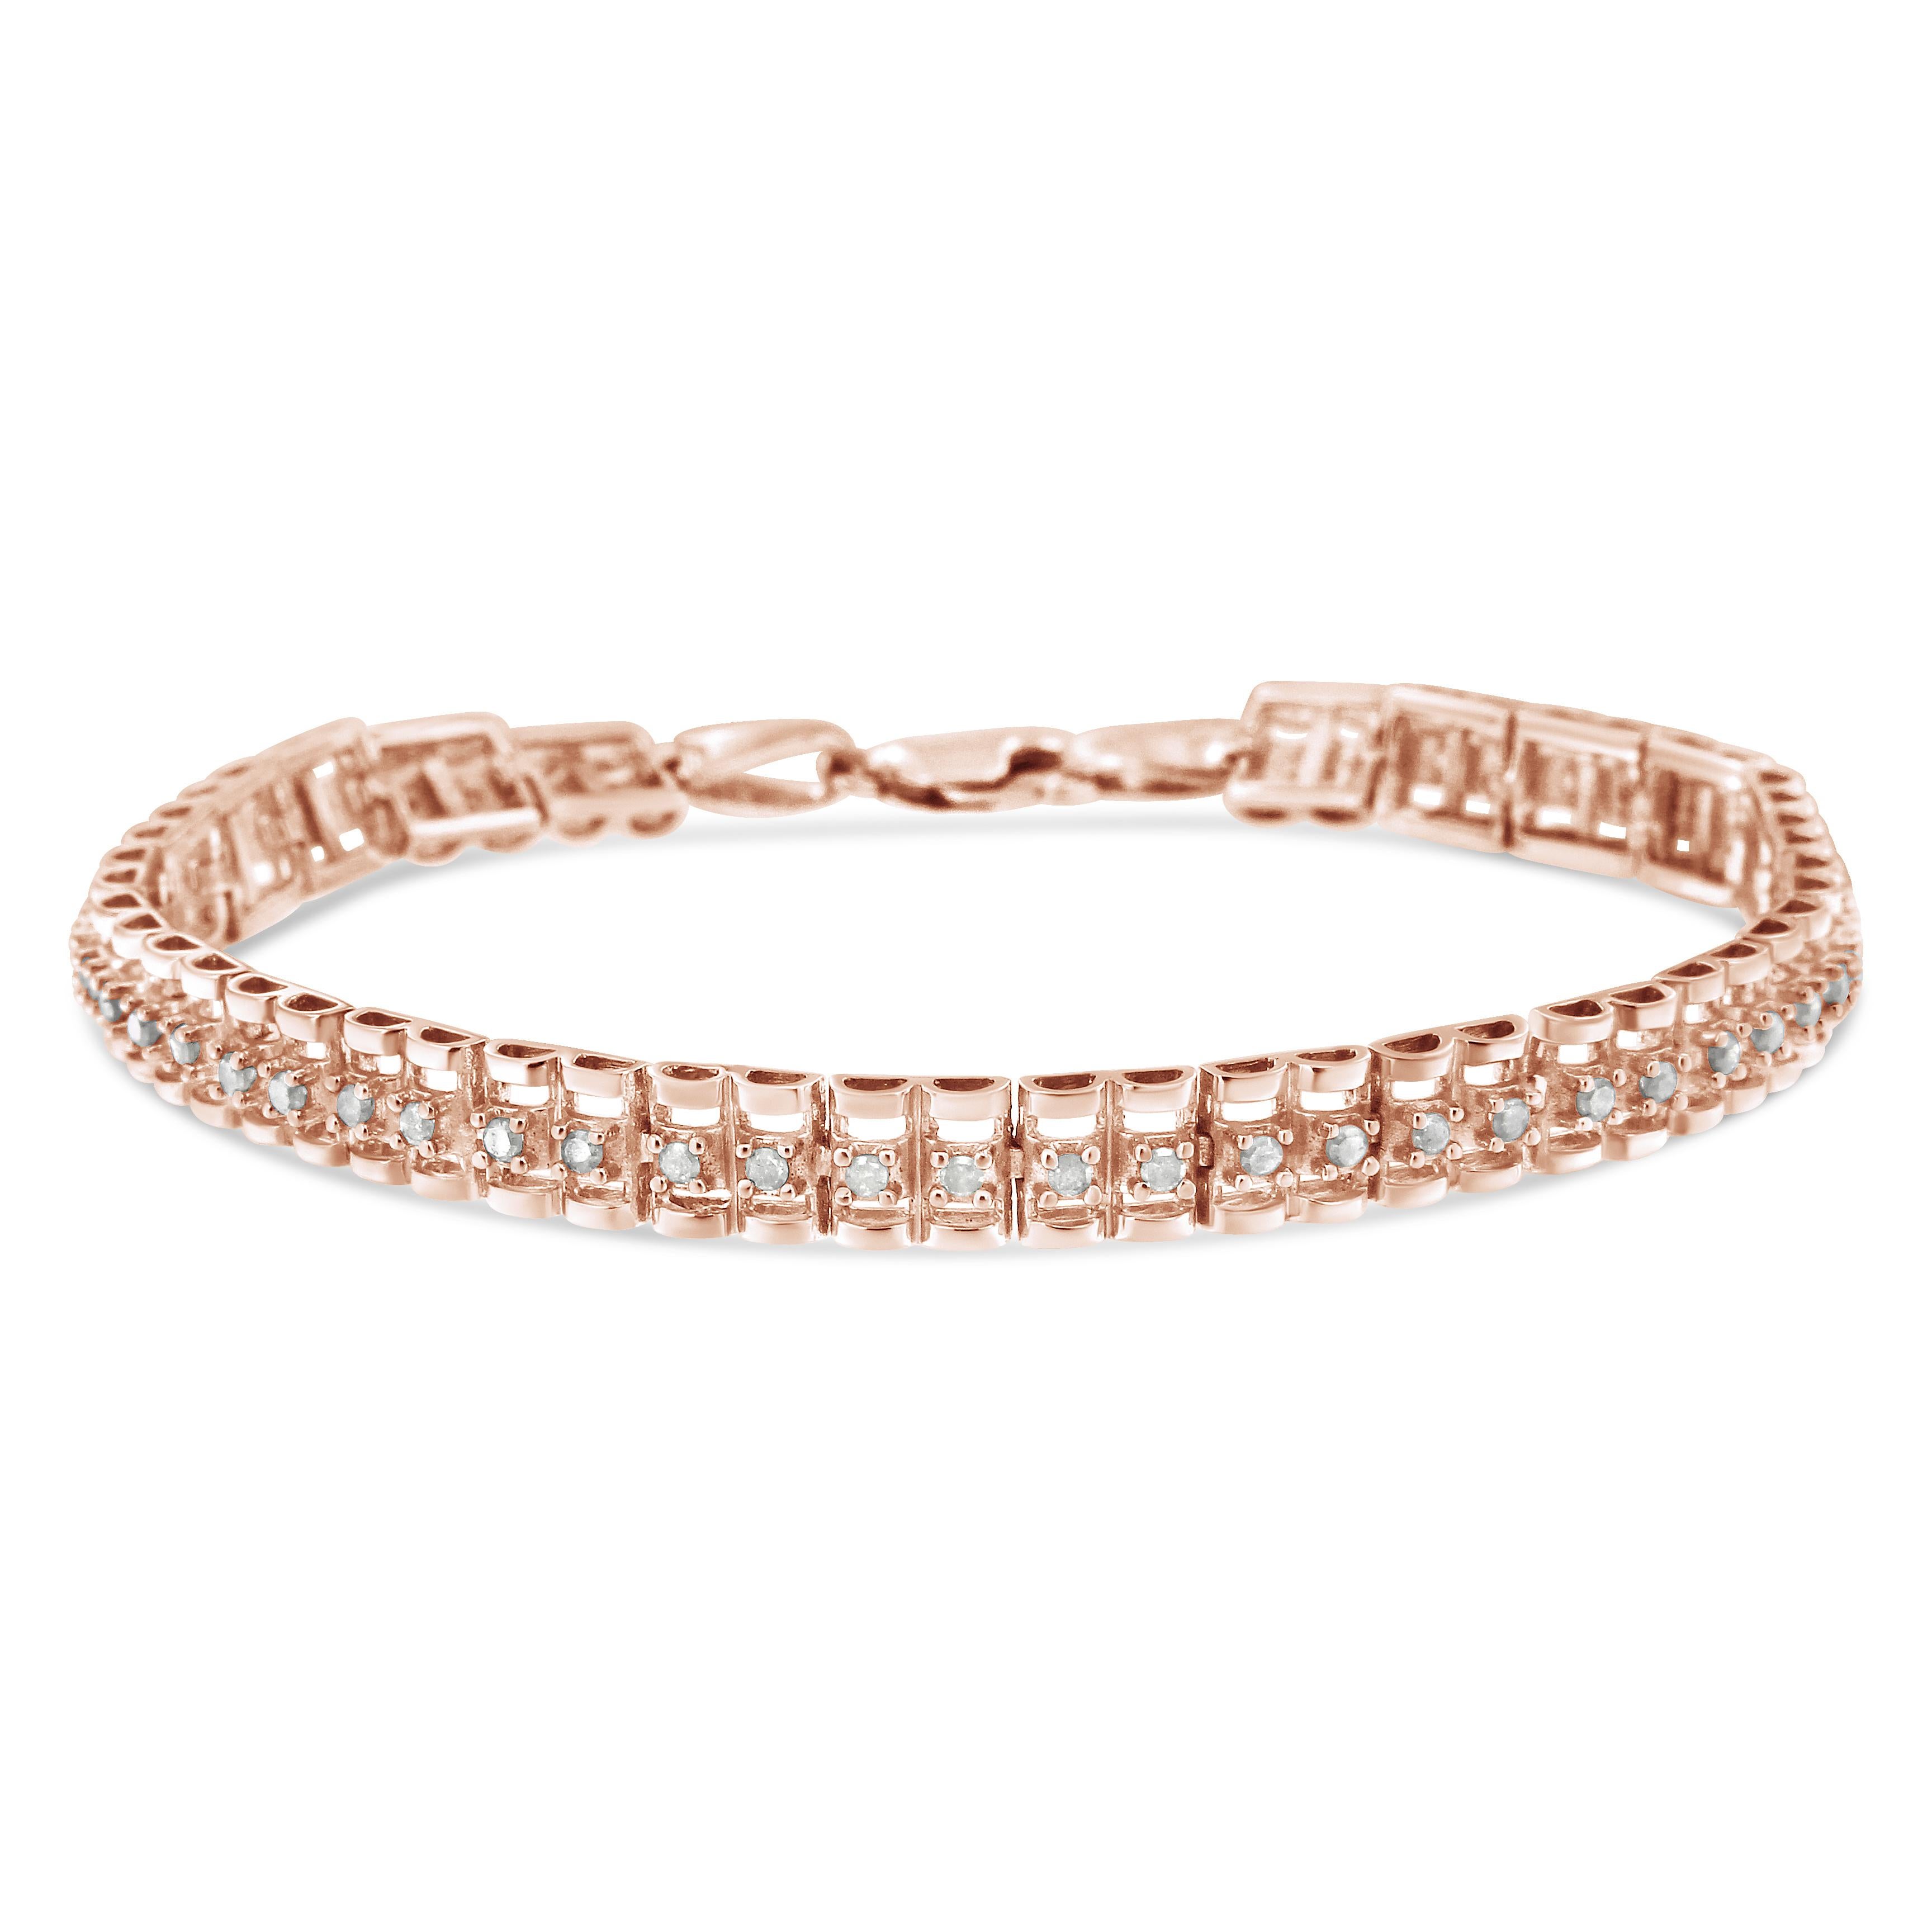 This gorgeous .925 sterling silver tennis bracelet features 2.0 carat total weight with 48 round, rose cut diamonds. The tennis bracelet has hinged links with two shapes surrounding two diamonds on each side. Rose-cut, promo quality diamonds are